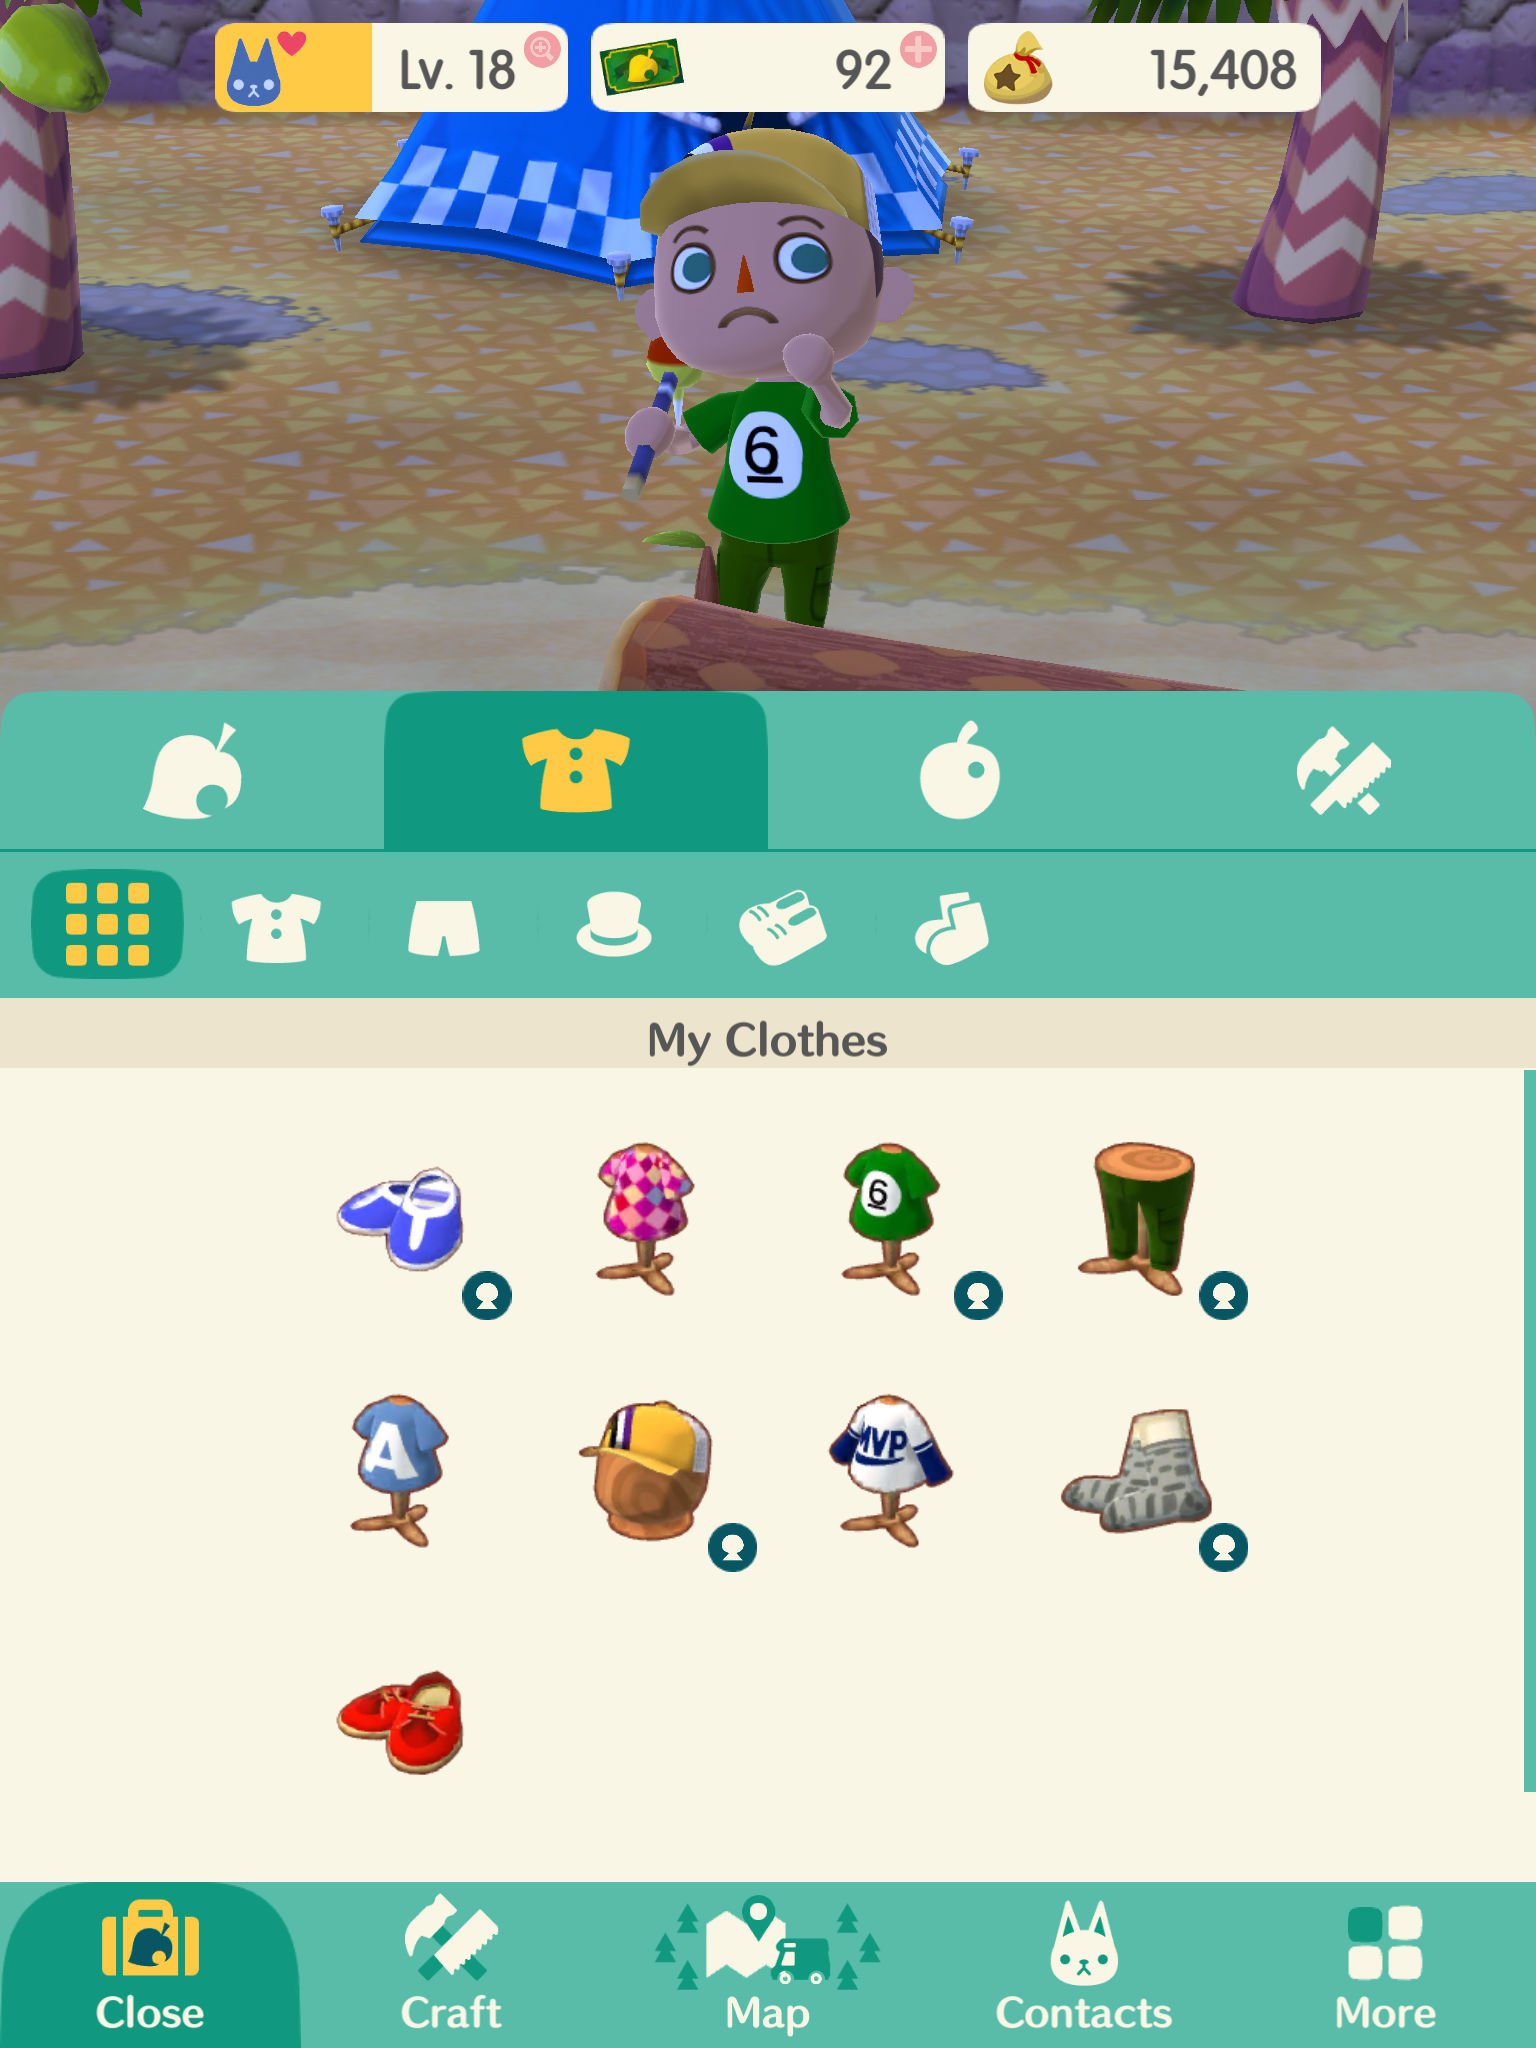 How to Edit Your Appearance in Animal Crossing: Pocket Camp